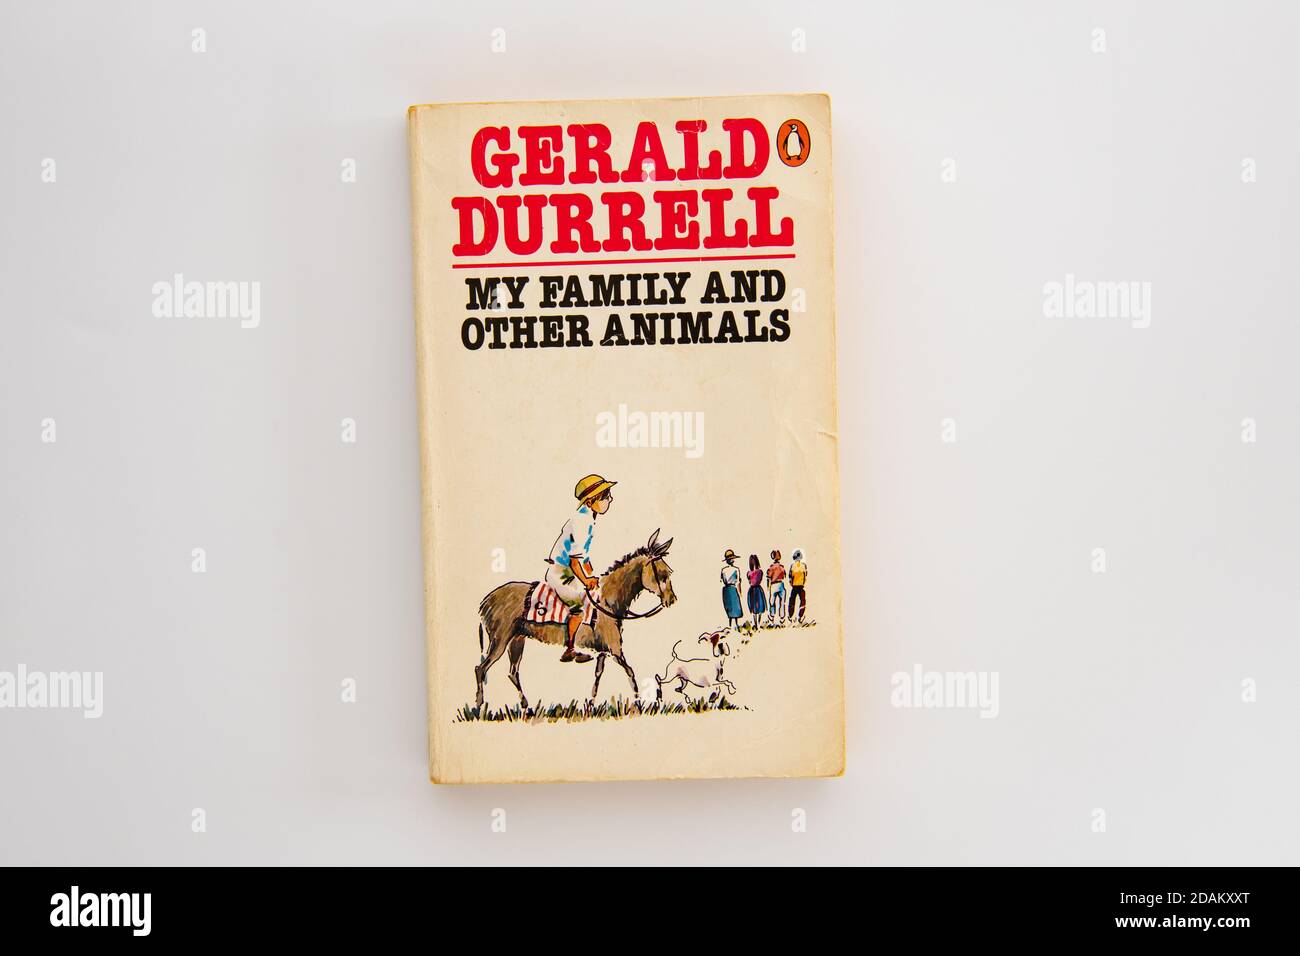 My Family and other Animals - Gerald Durrell Stock Photo